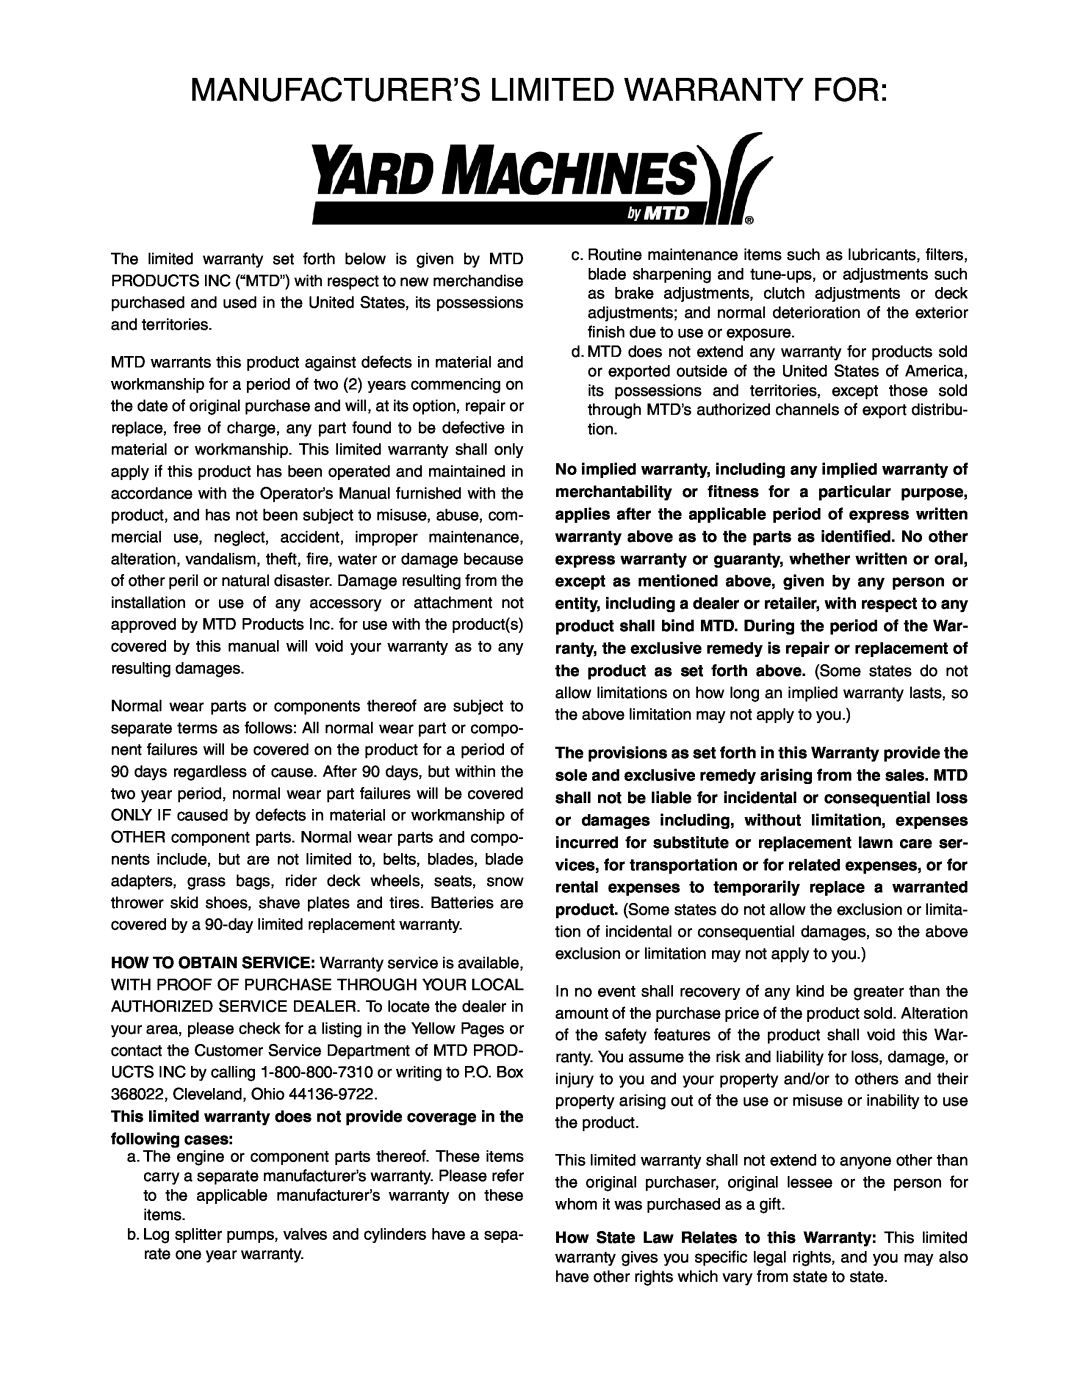 Yard Machines 430 manual Manufacturer’S Limited Warranty For 